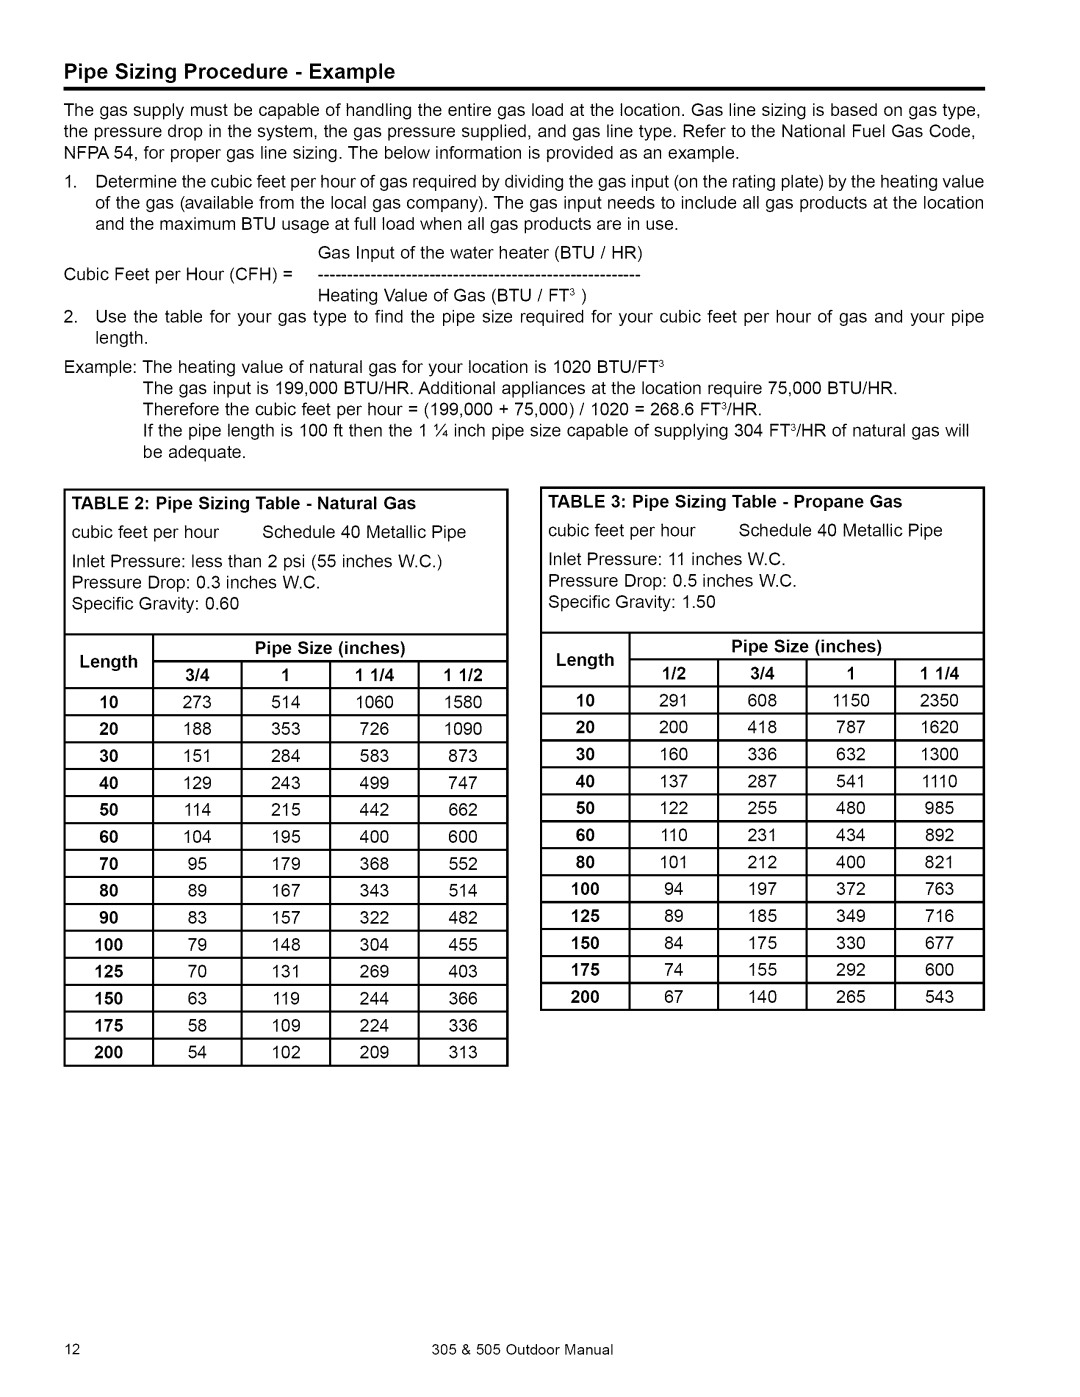 Kenmore 505, 305 owner manual Pipe Sizing Procedure - Example 